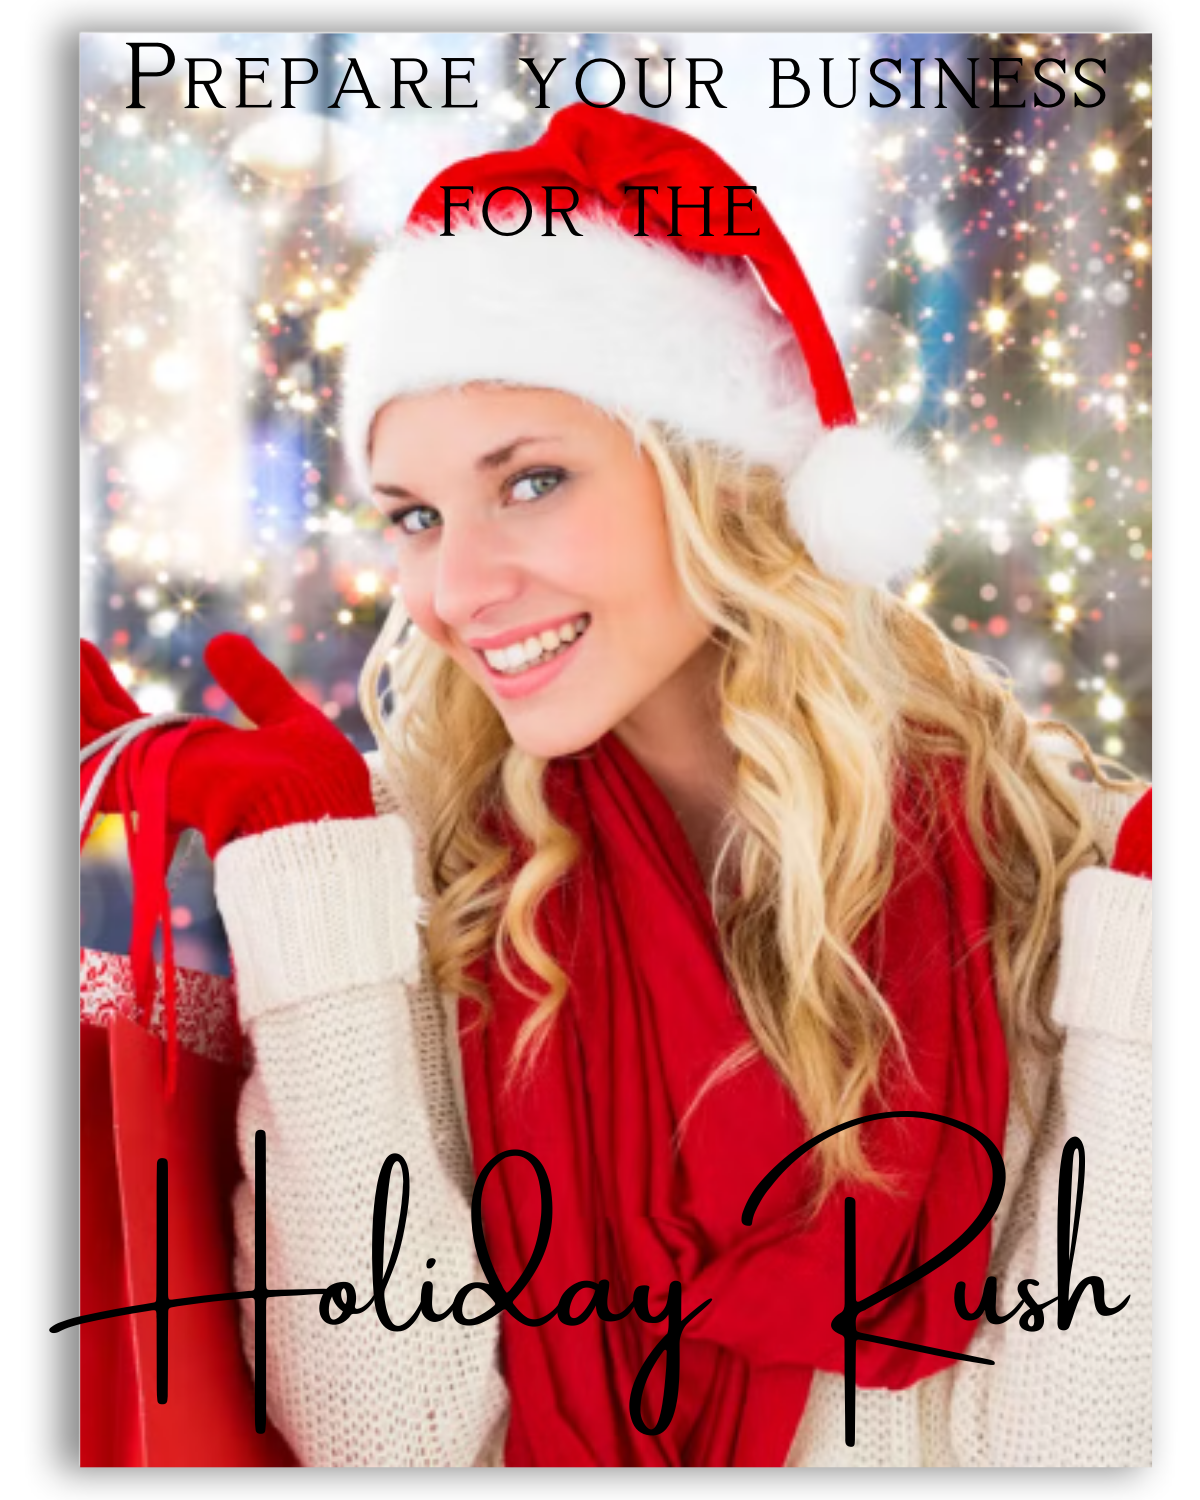 Preparing your business for the Holiday Rush